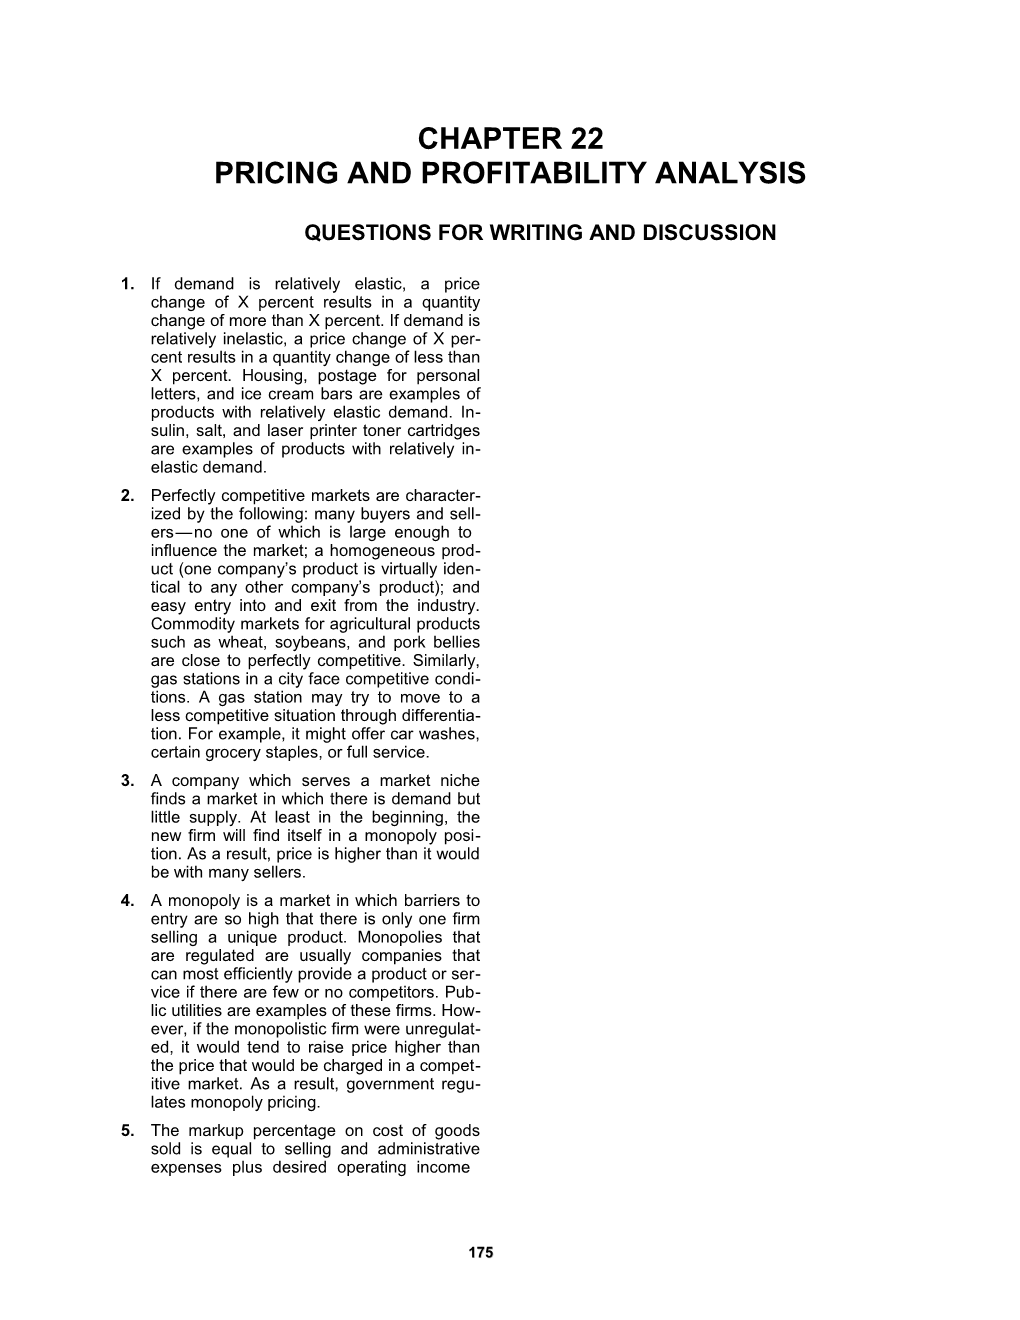 Chapter 22: Pricing and Profitability Analysis